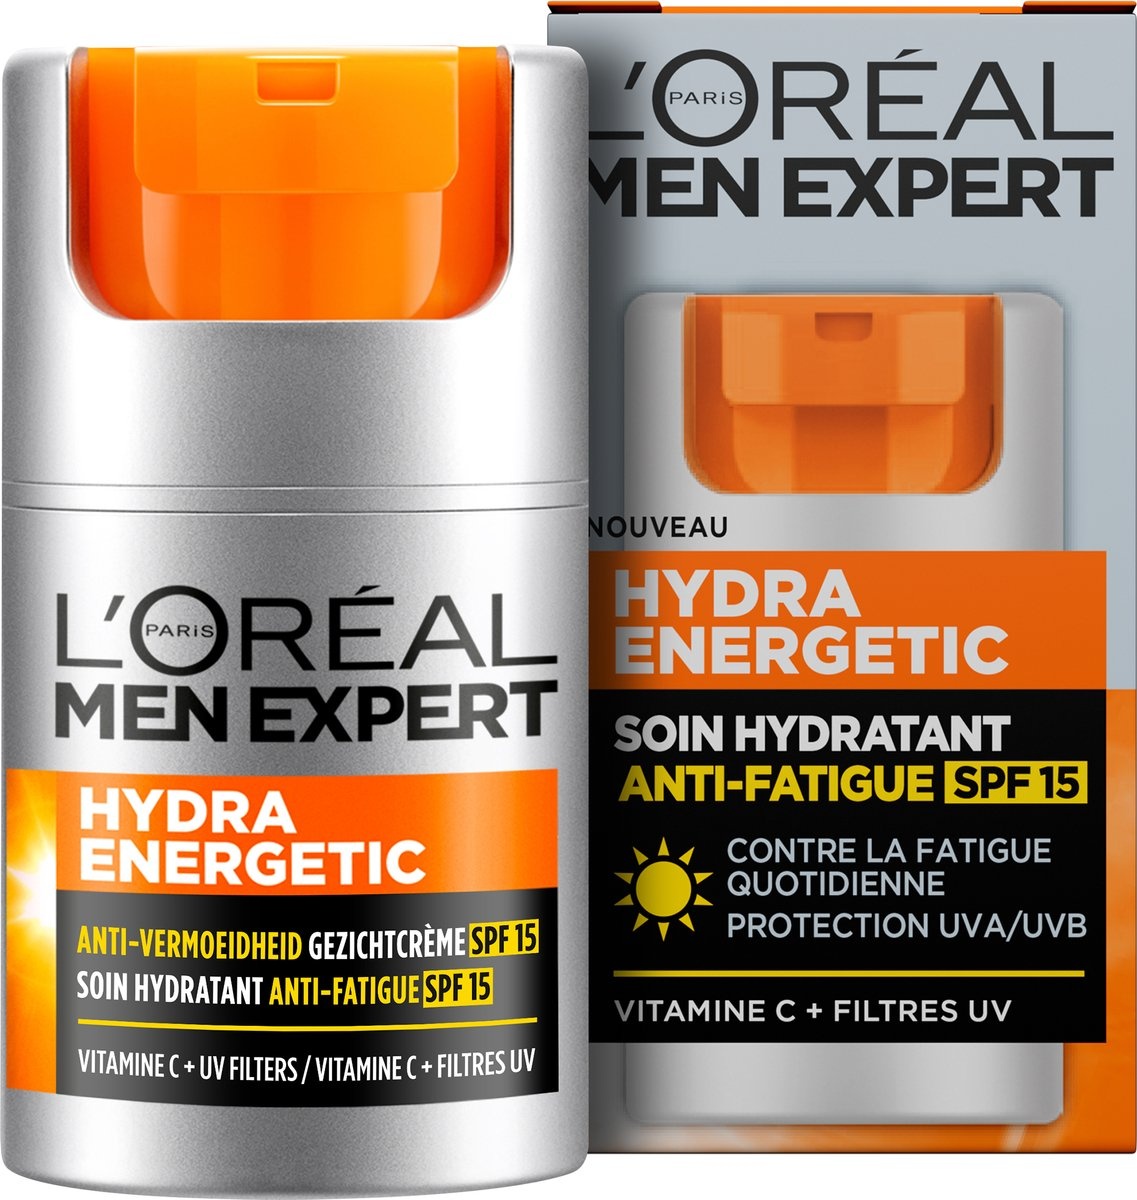 L'Oréal Paris Hydra Energetic Feuchtigkeitsspendende Tagescreme LSF 15 - 50 ml